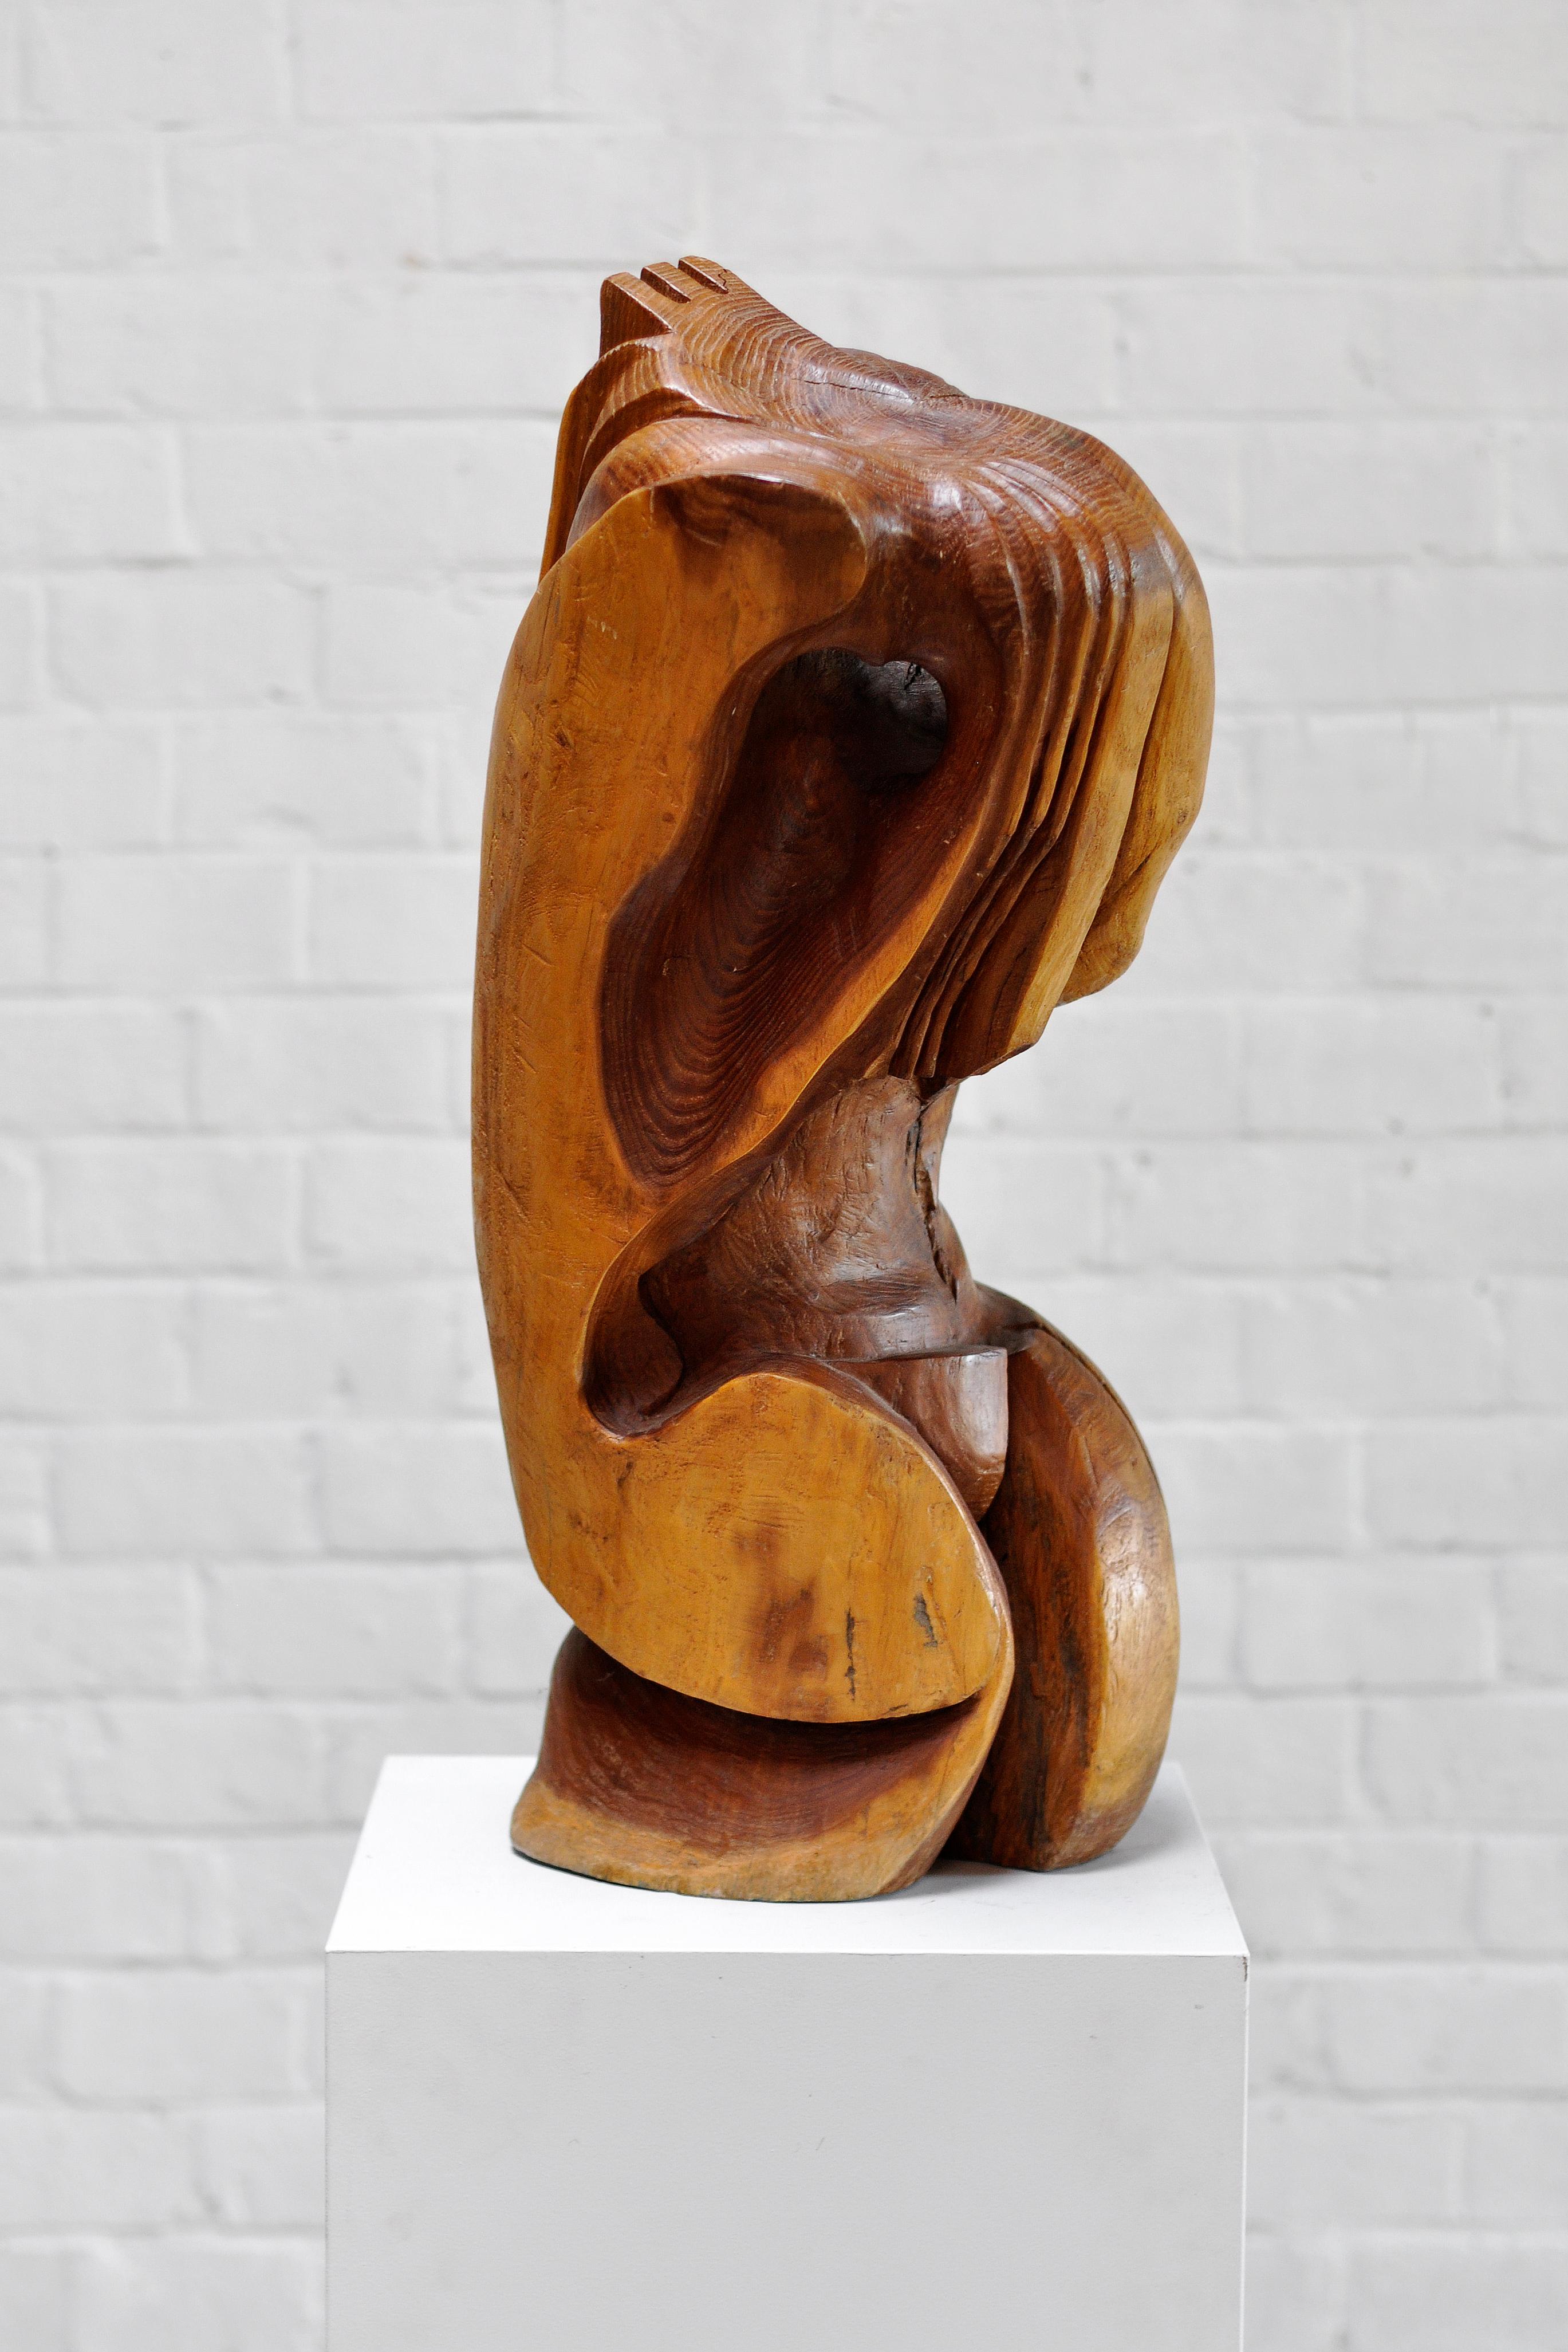 A large organic free-form sculpture made out of wood, Italy 1960s
Retrieved from an Italian modernist home, this piece was possibly made for the project on request.
This sculpture shows a very appealing organic composition and is different in